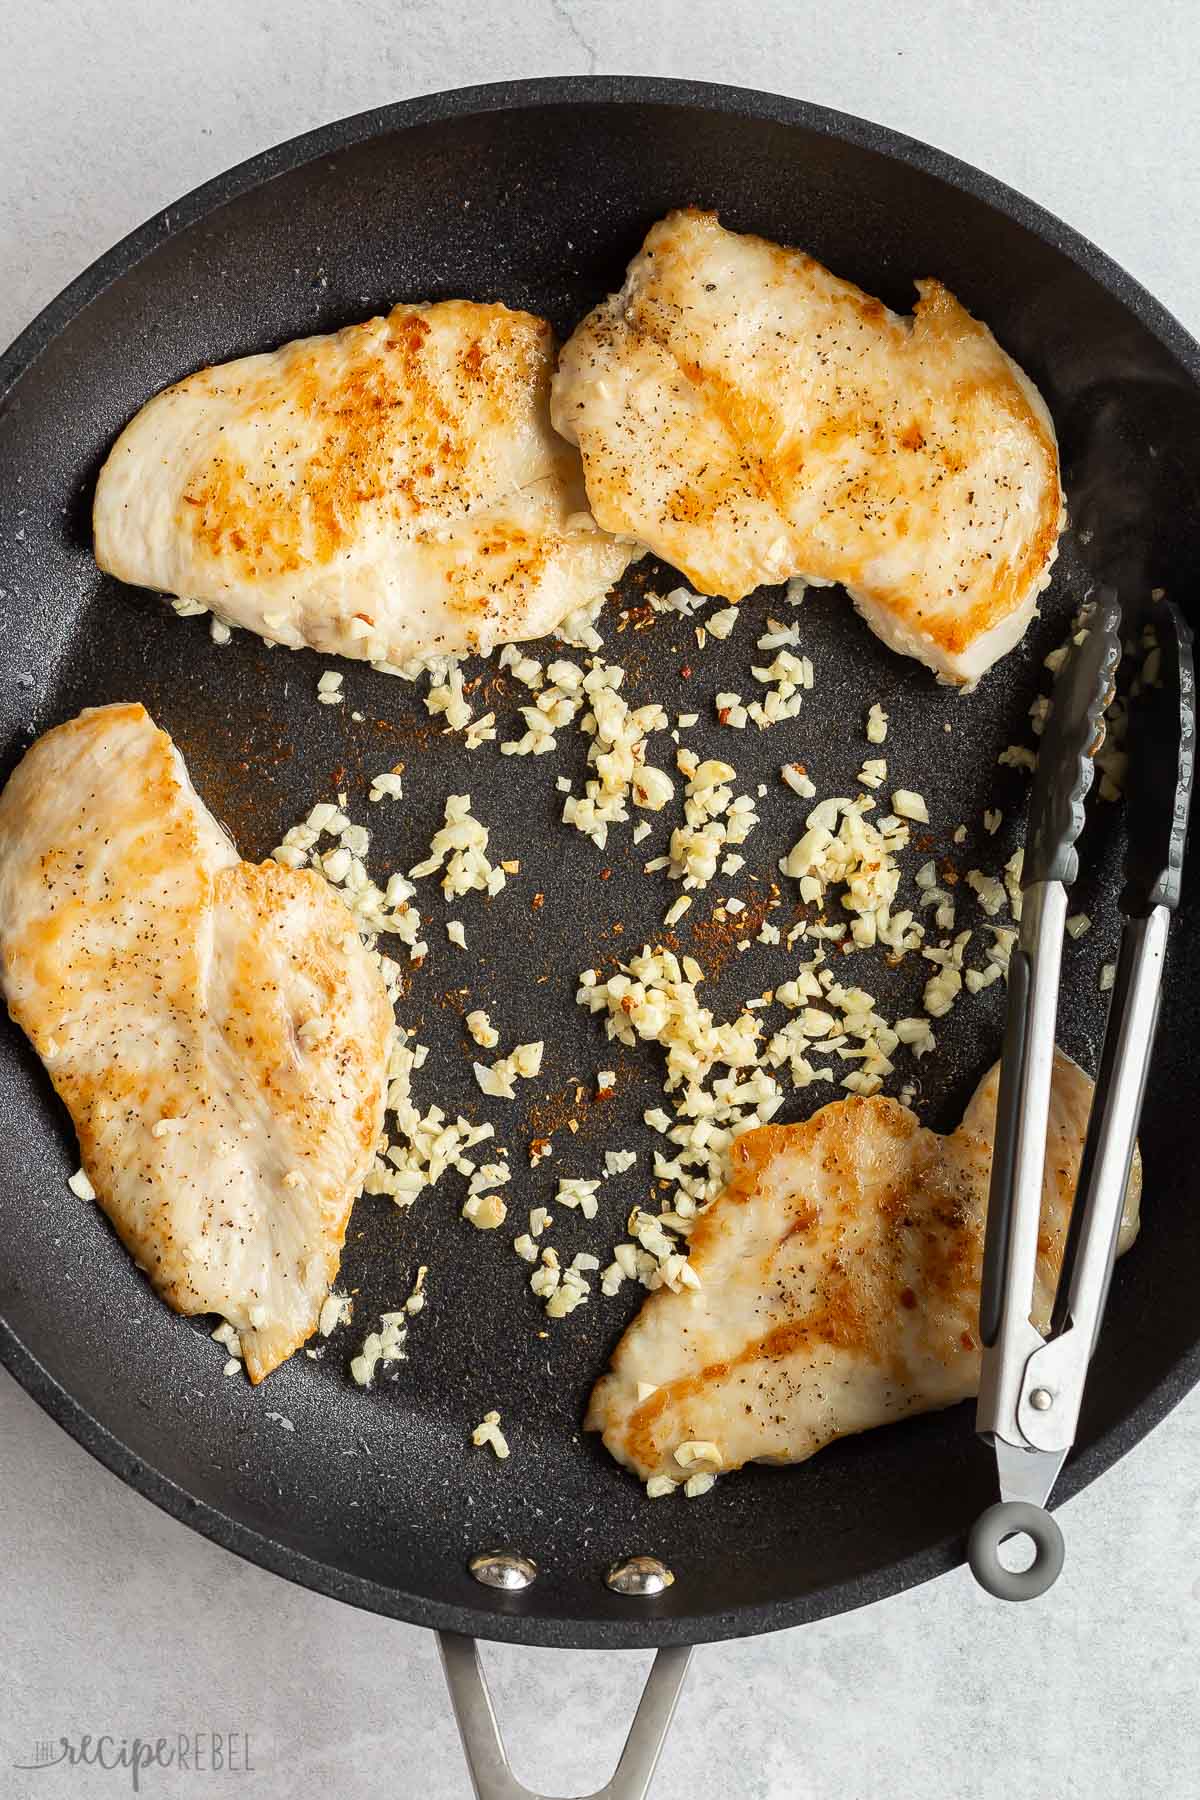 garlic and spices added to chicken breasts in skill.et